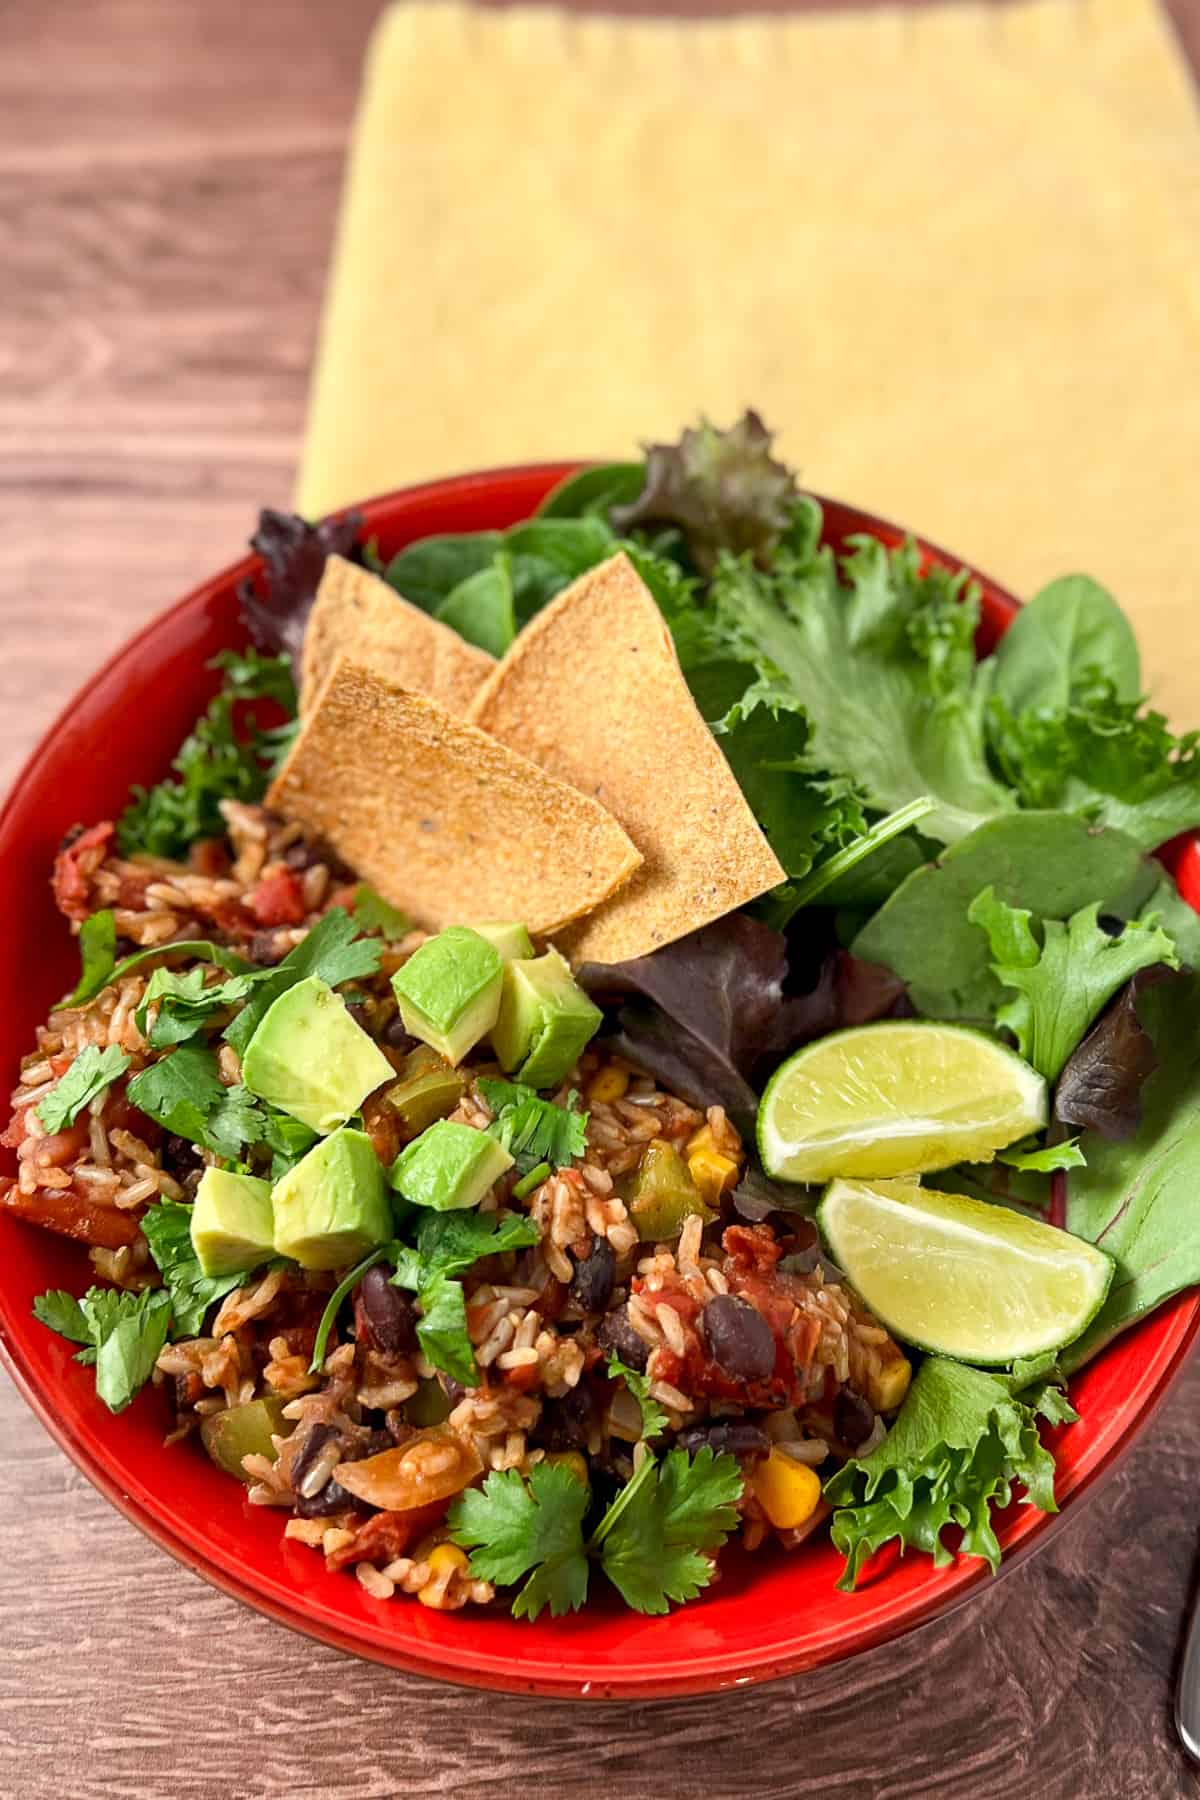 top view of Mexican Rice Casserole with avocado, cilantro, lime, green salad and oven baked tortilla chips